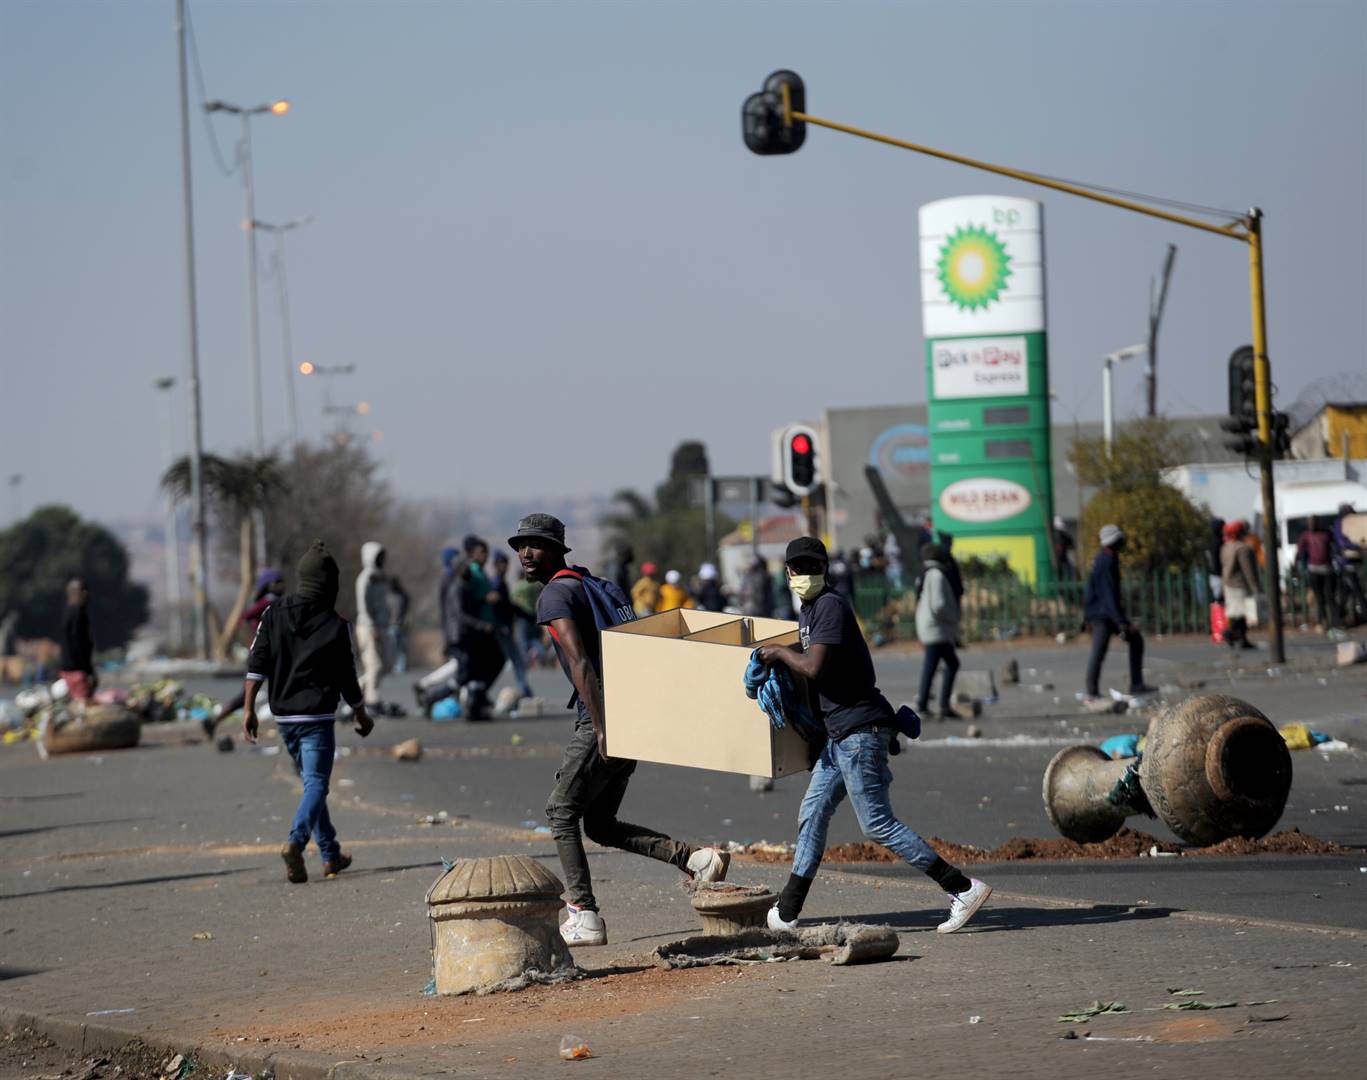 News24 | High alert! Police ramp up security measures to prevent unrest, violence ahead of elections